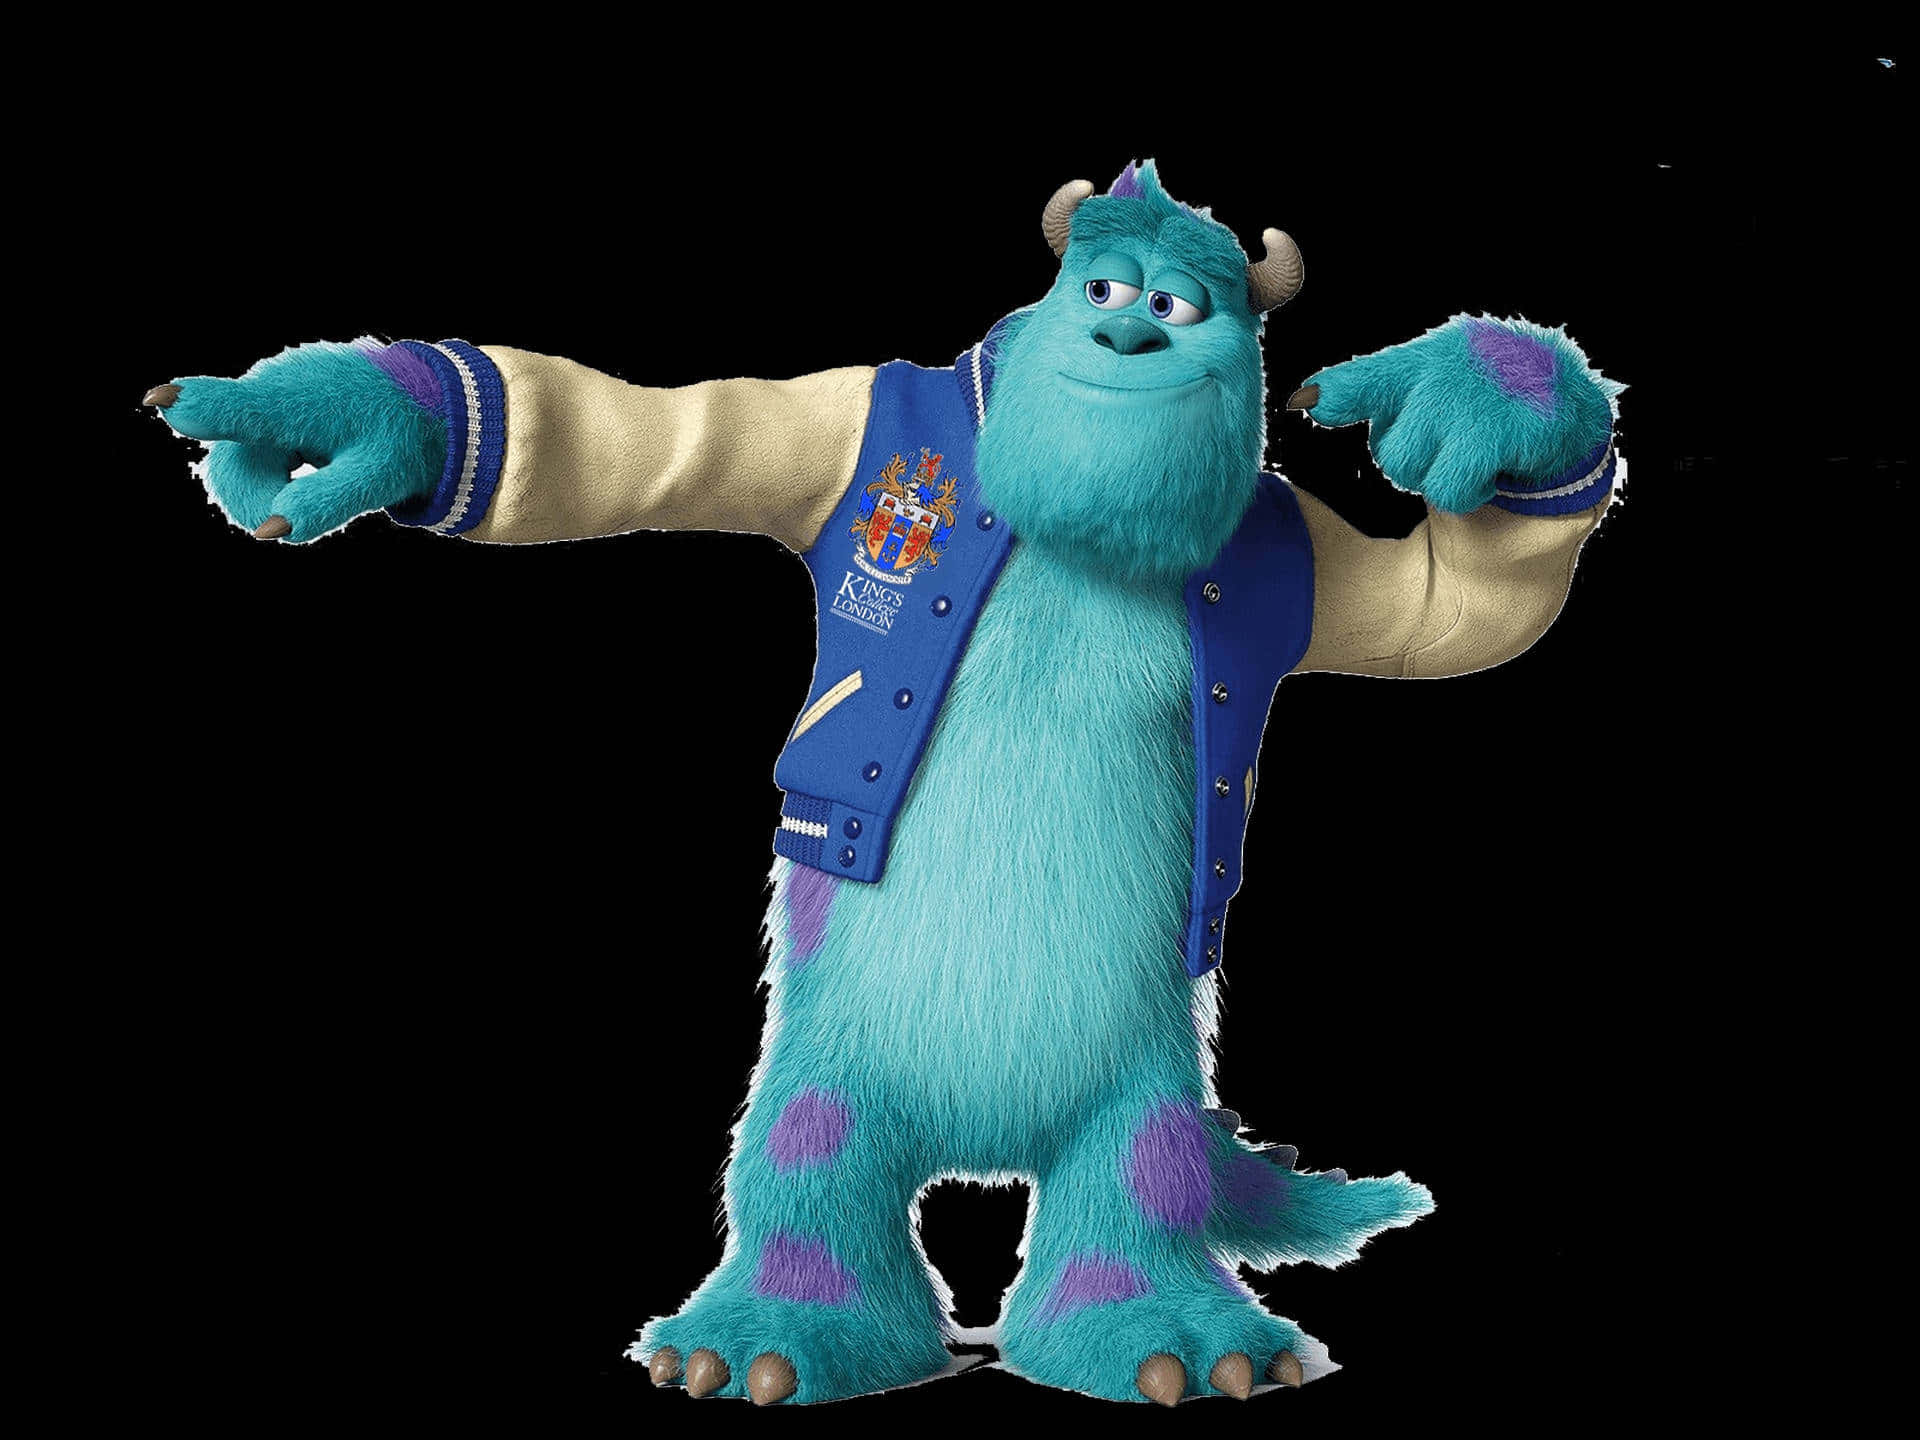 "Friends Forever: Mike and Sully Together in Monsters, Inc."